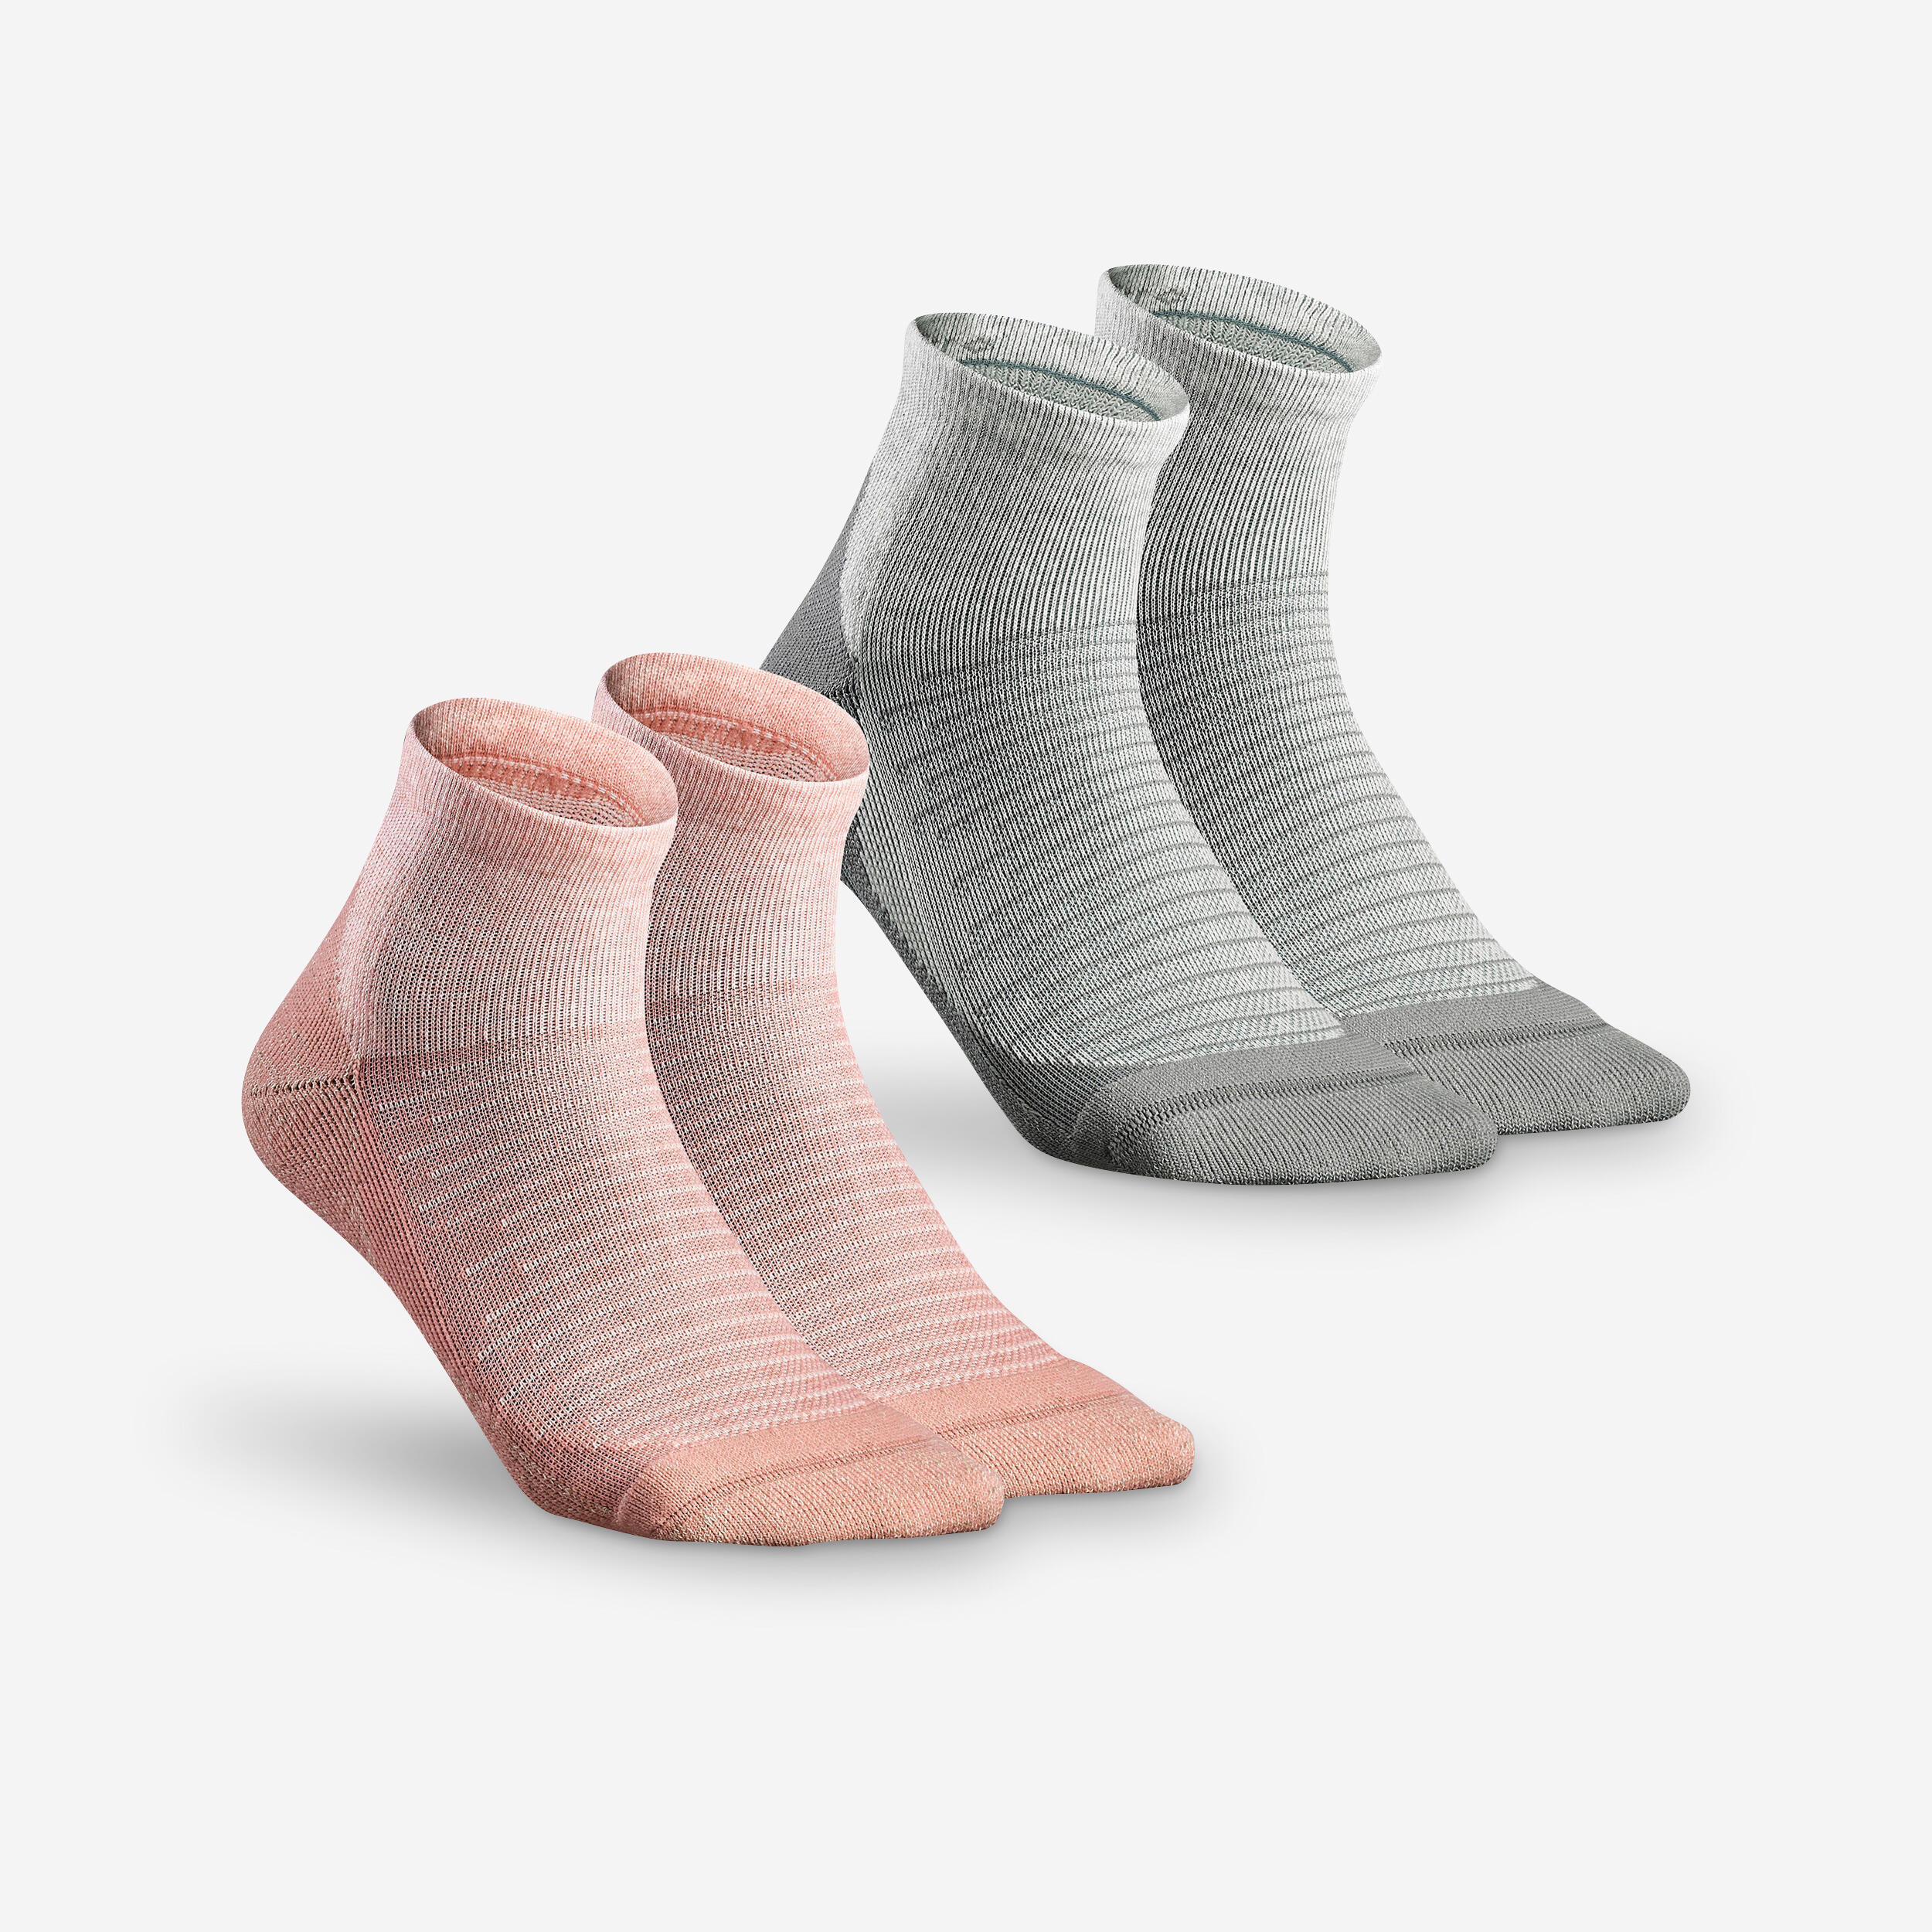 QUECHUA Hike 100 Mid Socks - Pink and Grey- Pack of 2